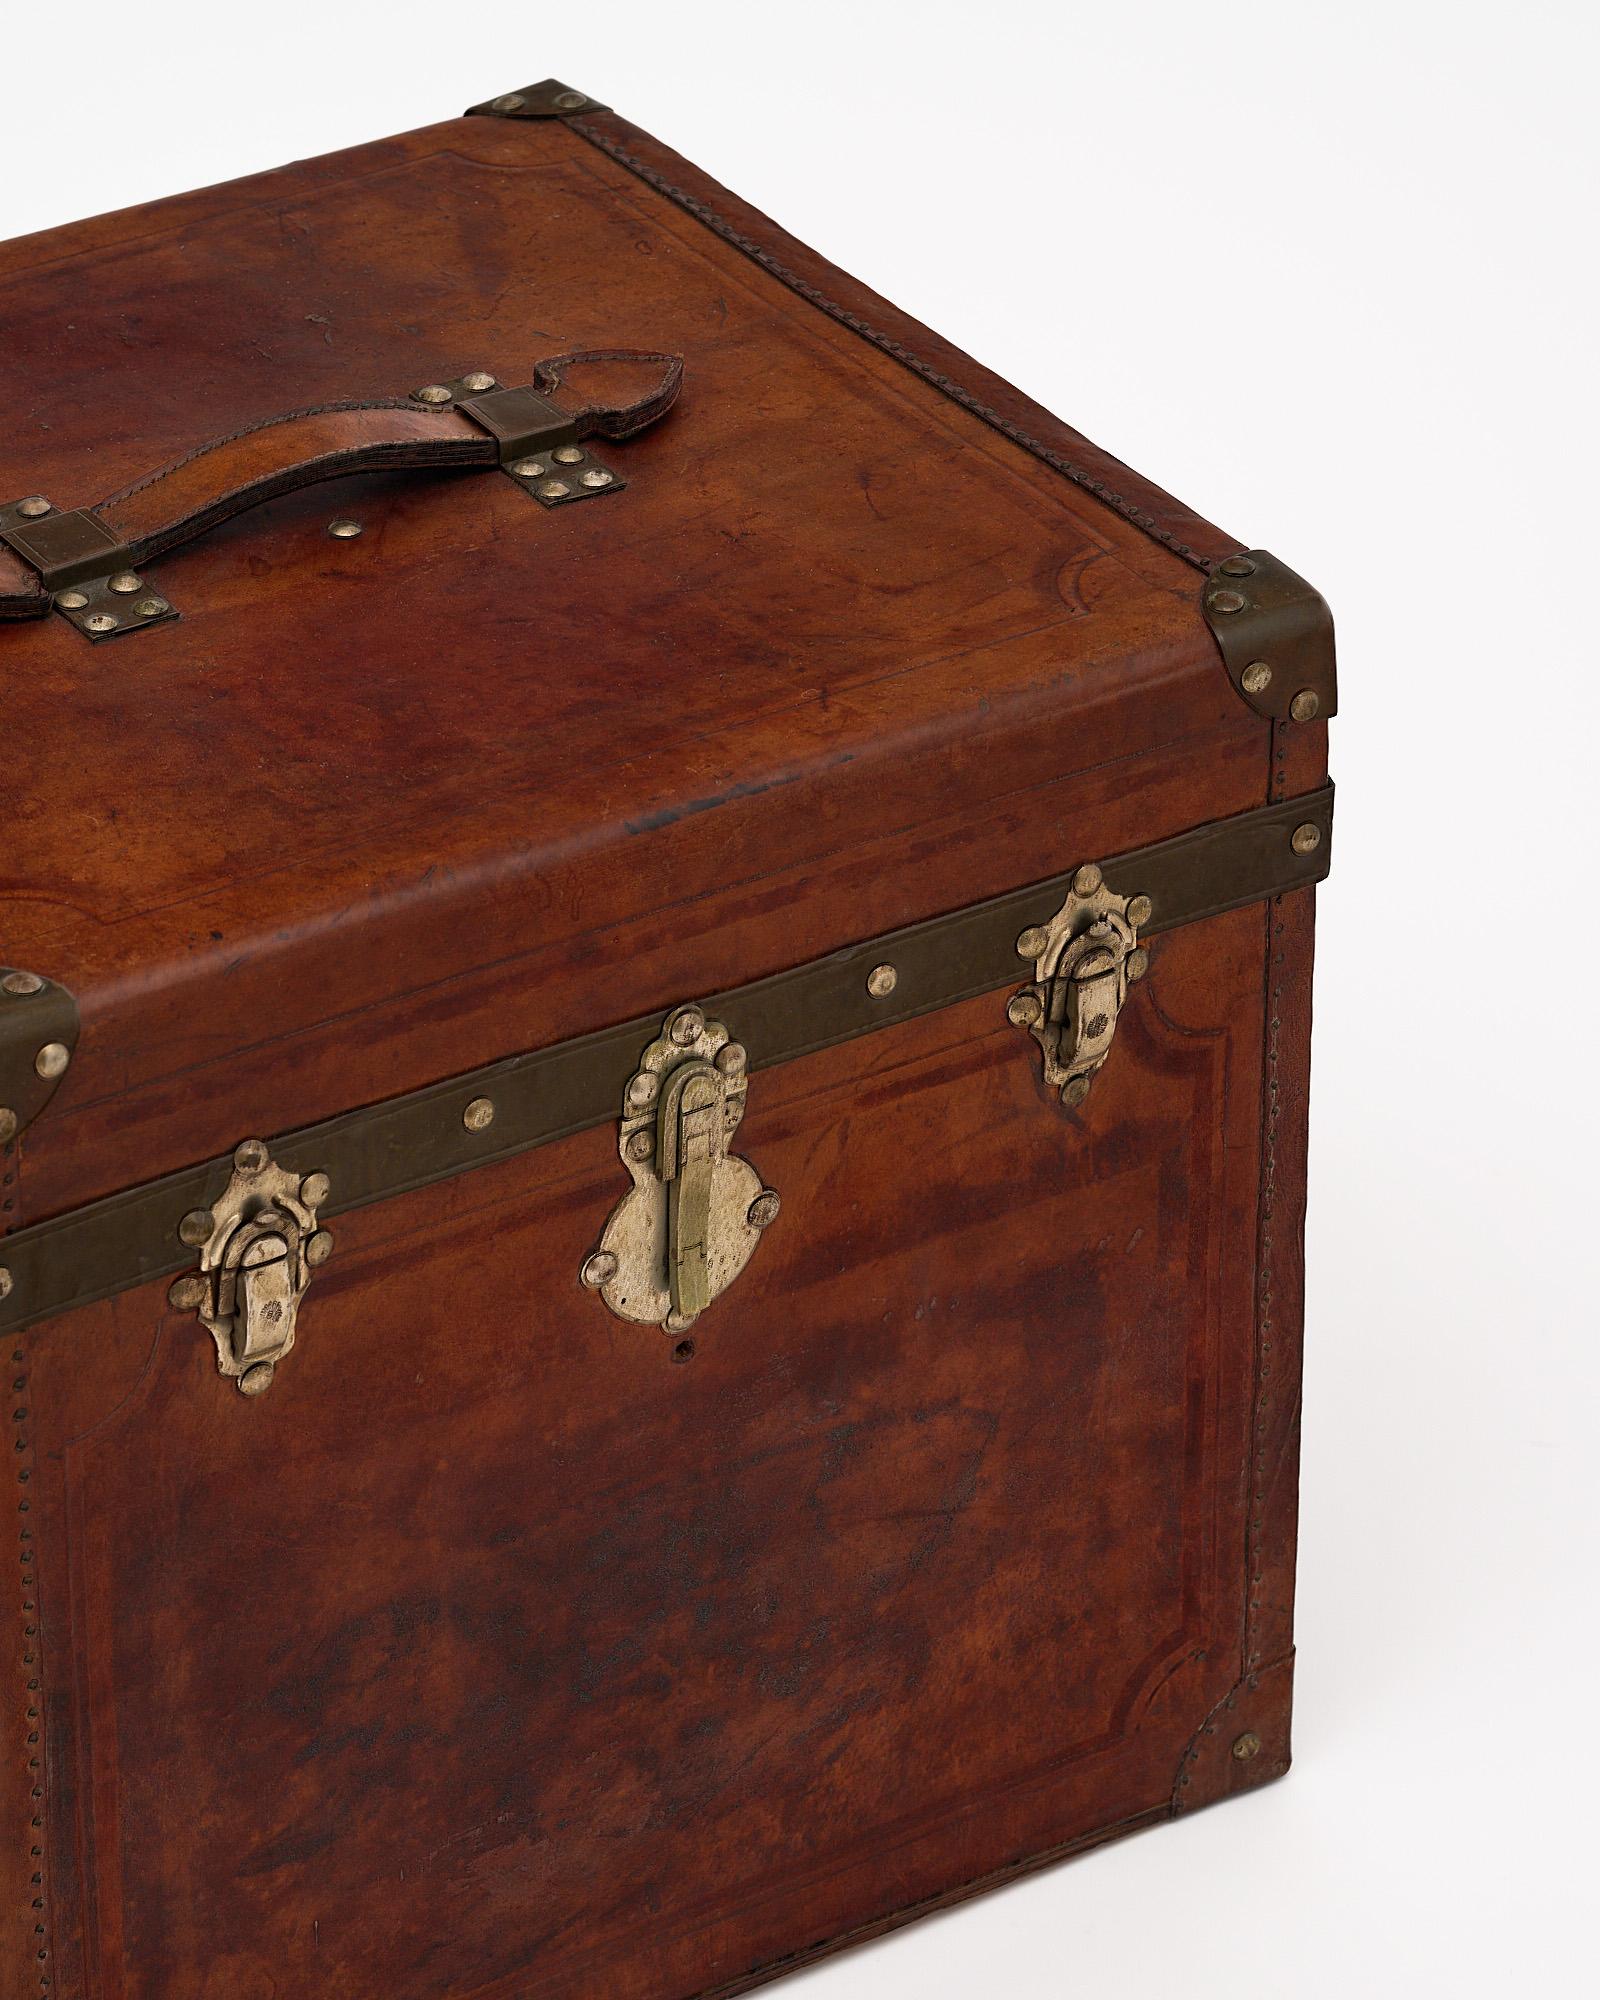 Traveling trunk, French, made with a patinated leather. This piece features three brass locks and beautiful detailing.